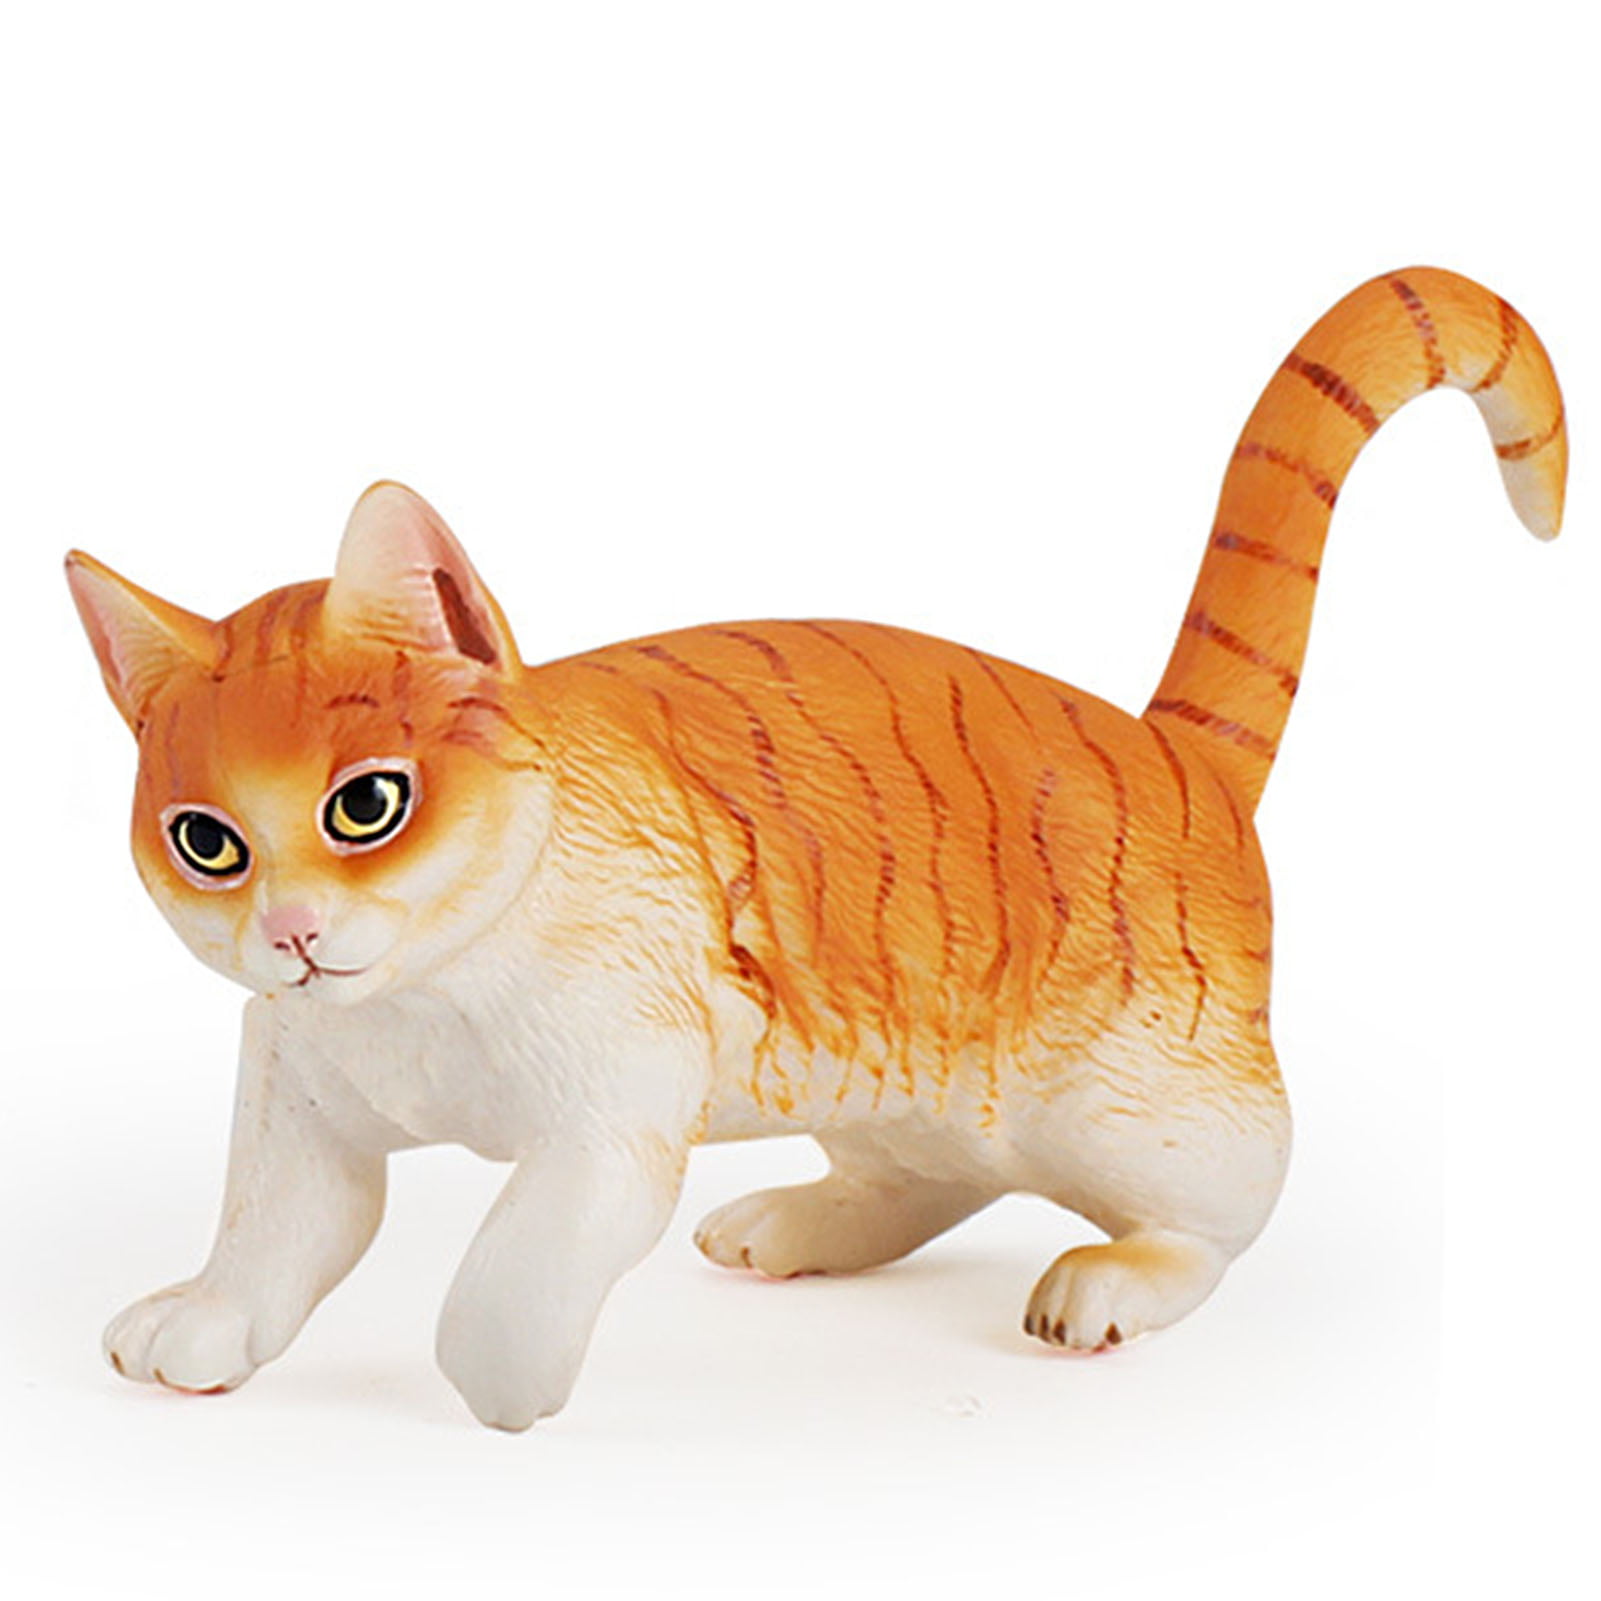 Details about   Simulation Cat Animal Model Home Decor Small Figures For Kids Christmas Toy JA 